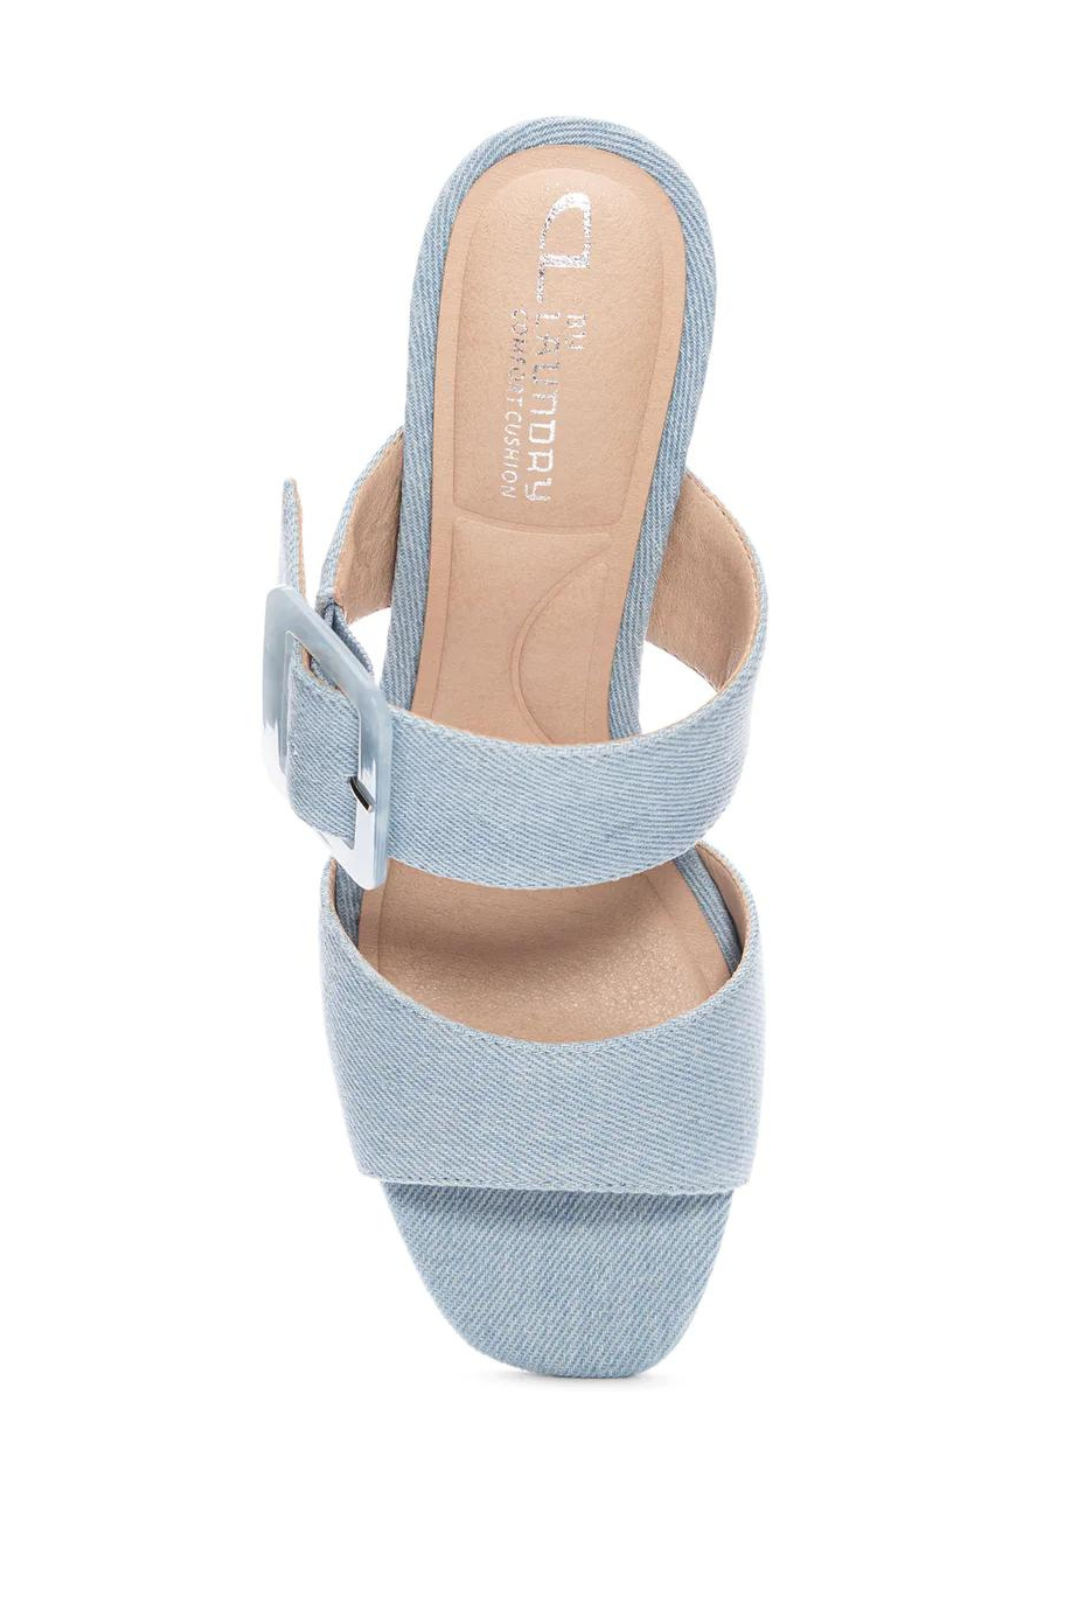 Chinese Laundry Briana Slide Sandal- Light Blue. Update warm weather looks by pairing these women's CL by Laundry Briana chambray blue sandals with your favourite jeans, skirty, dresses, and more. Crafted with textile fabric upper, these two banded resort ready sandals have a round open toe, oversized buckle detail at the instep band for a unique look, synthetic lining and padded synthetic sockliner for comfort The durable TPR outsole with stacked block heel heightens the appeal.